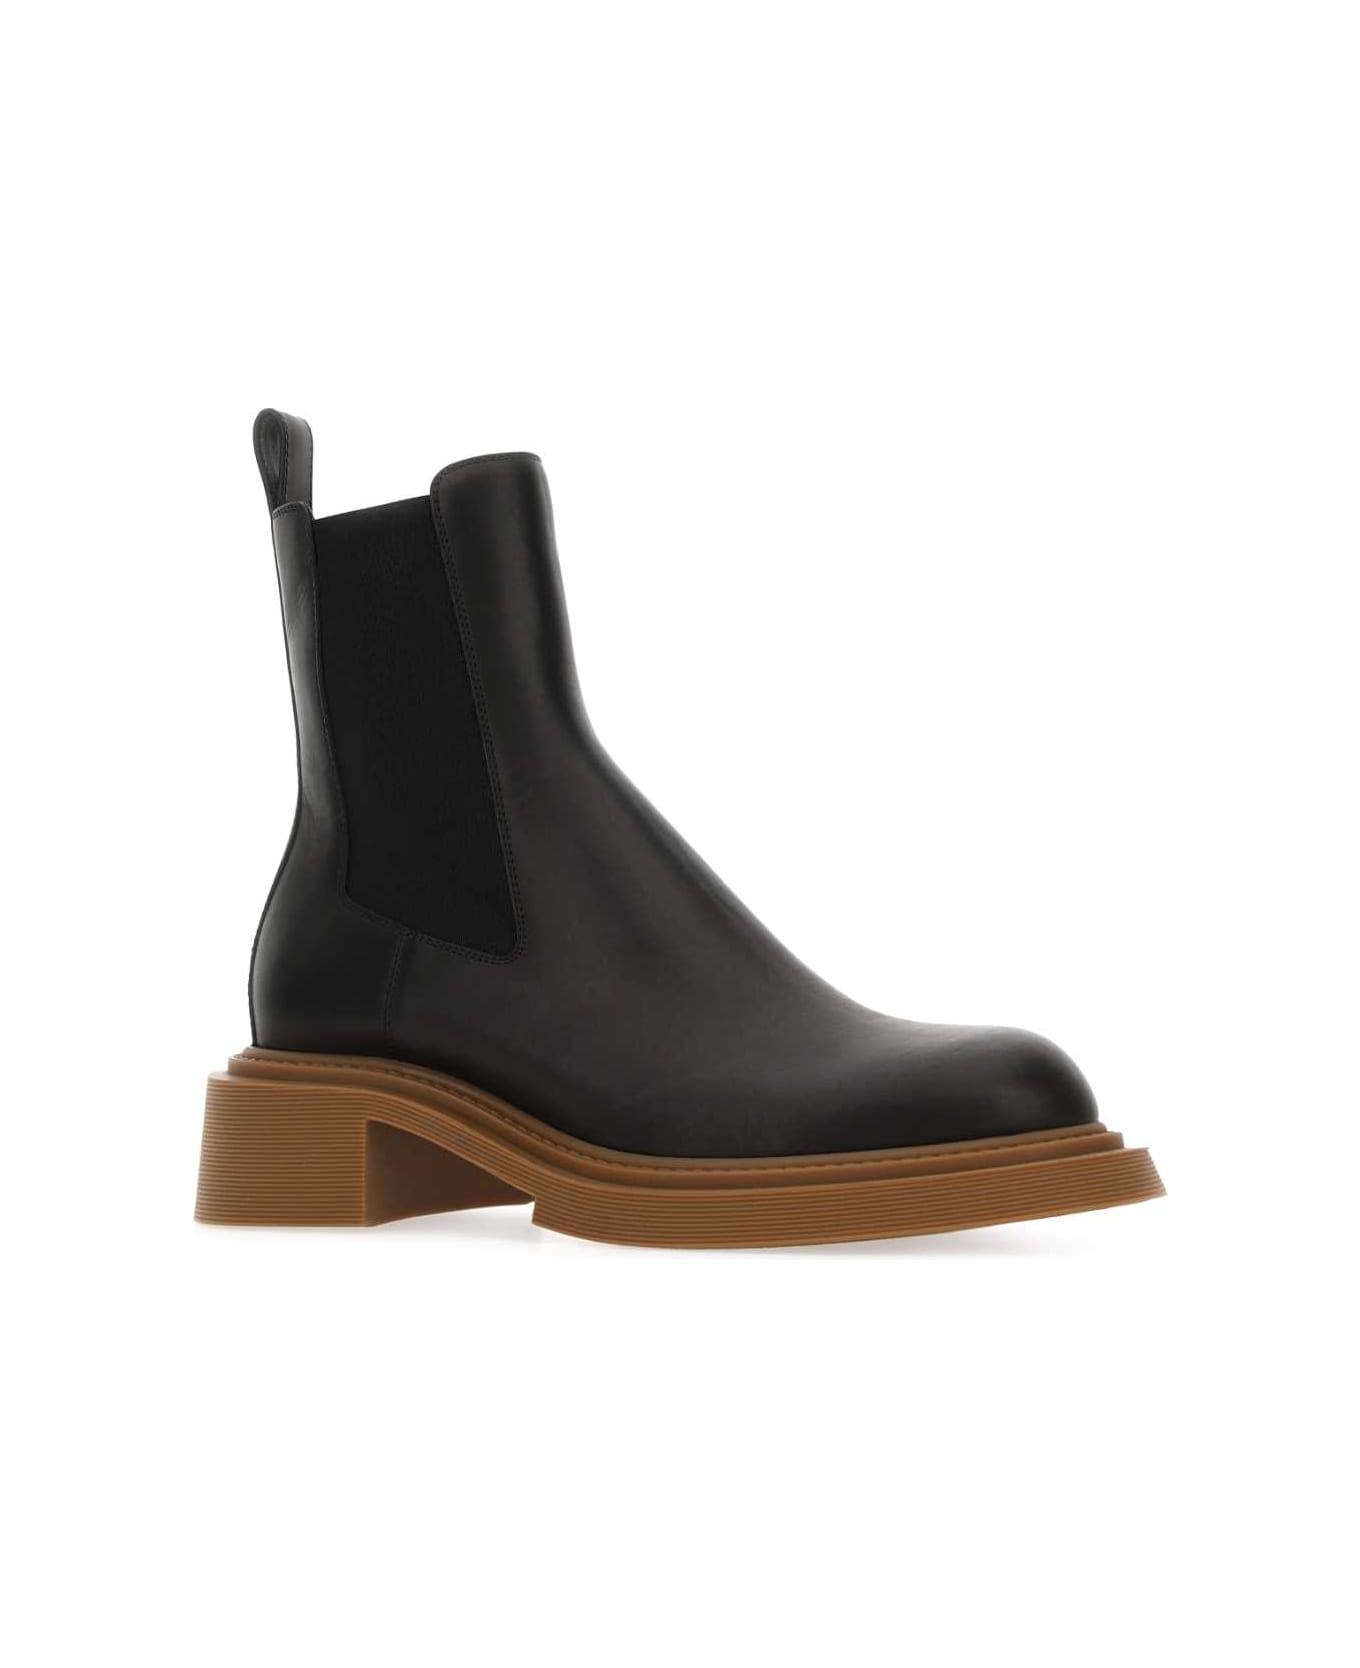 Loewe Black Leather Chelsea Ankle Boots - BLACK ブーツ